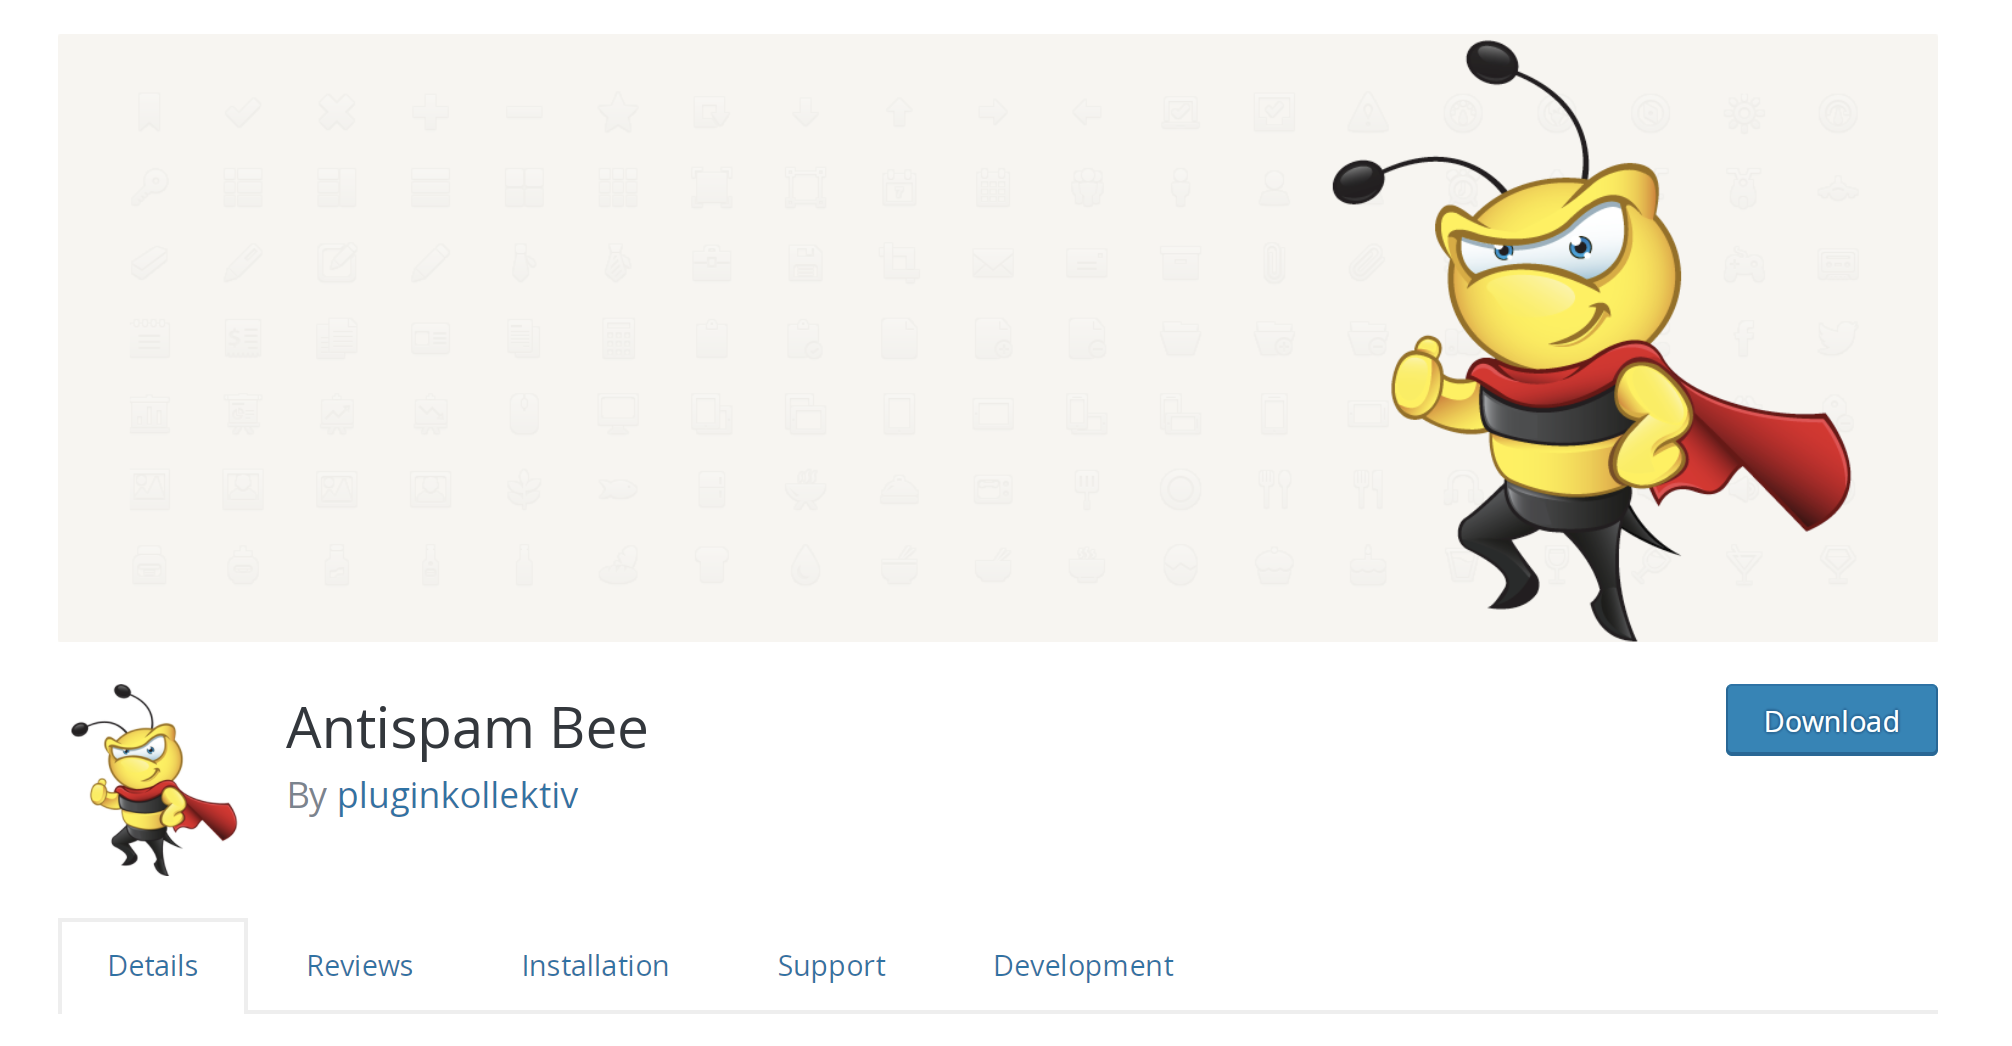 Antispam Bee in the plugin library